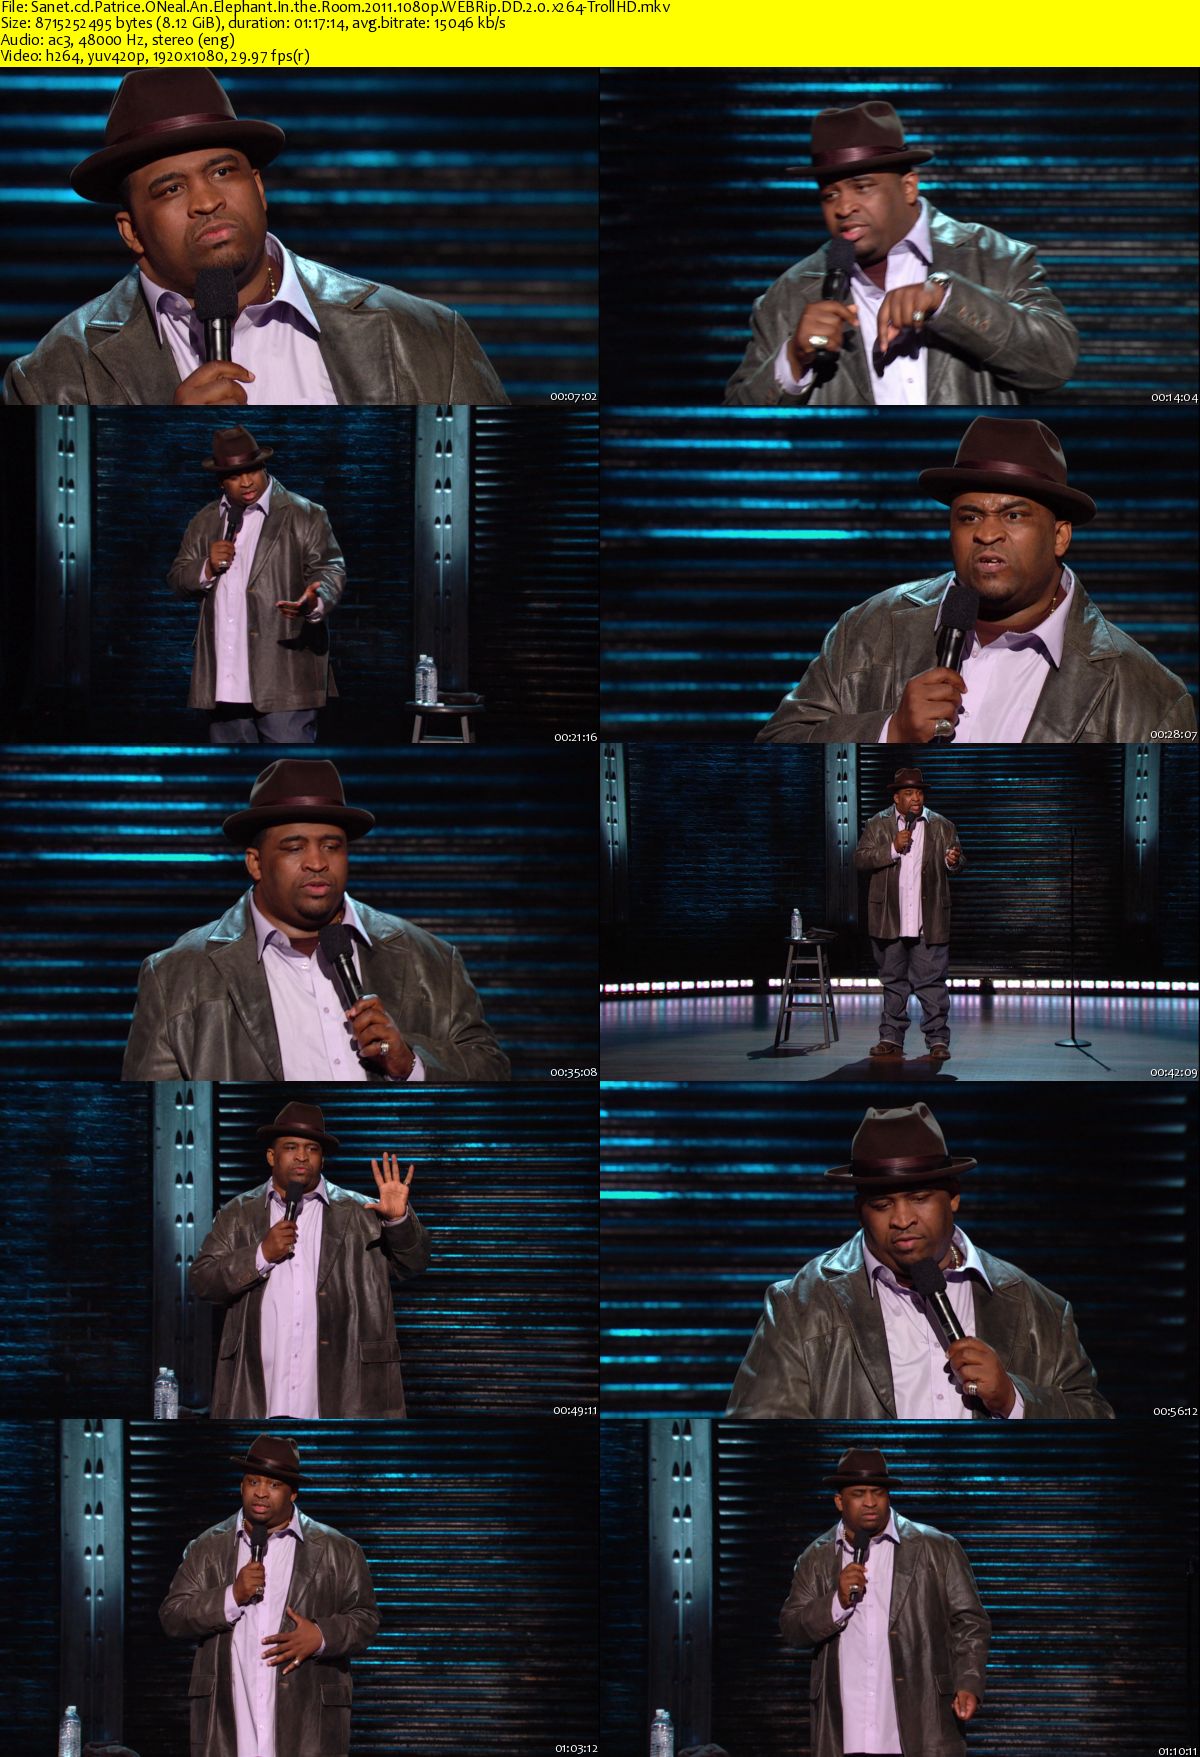 Download Patrice Oneal An Elephant In The Room 2011 1080p